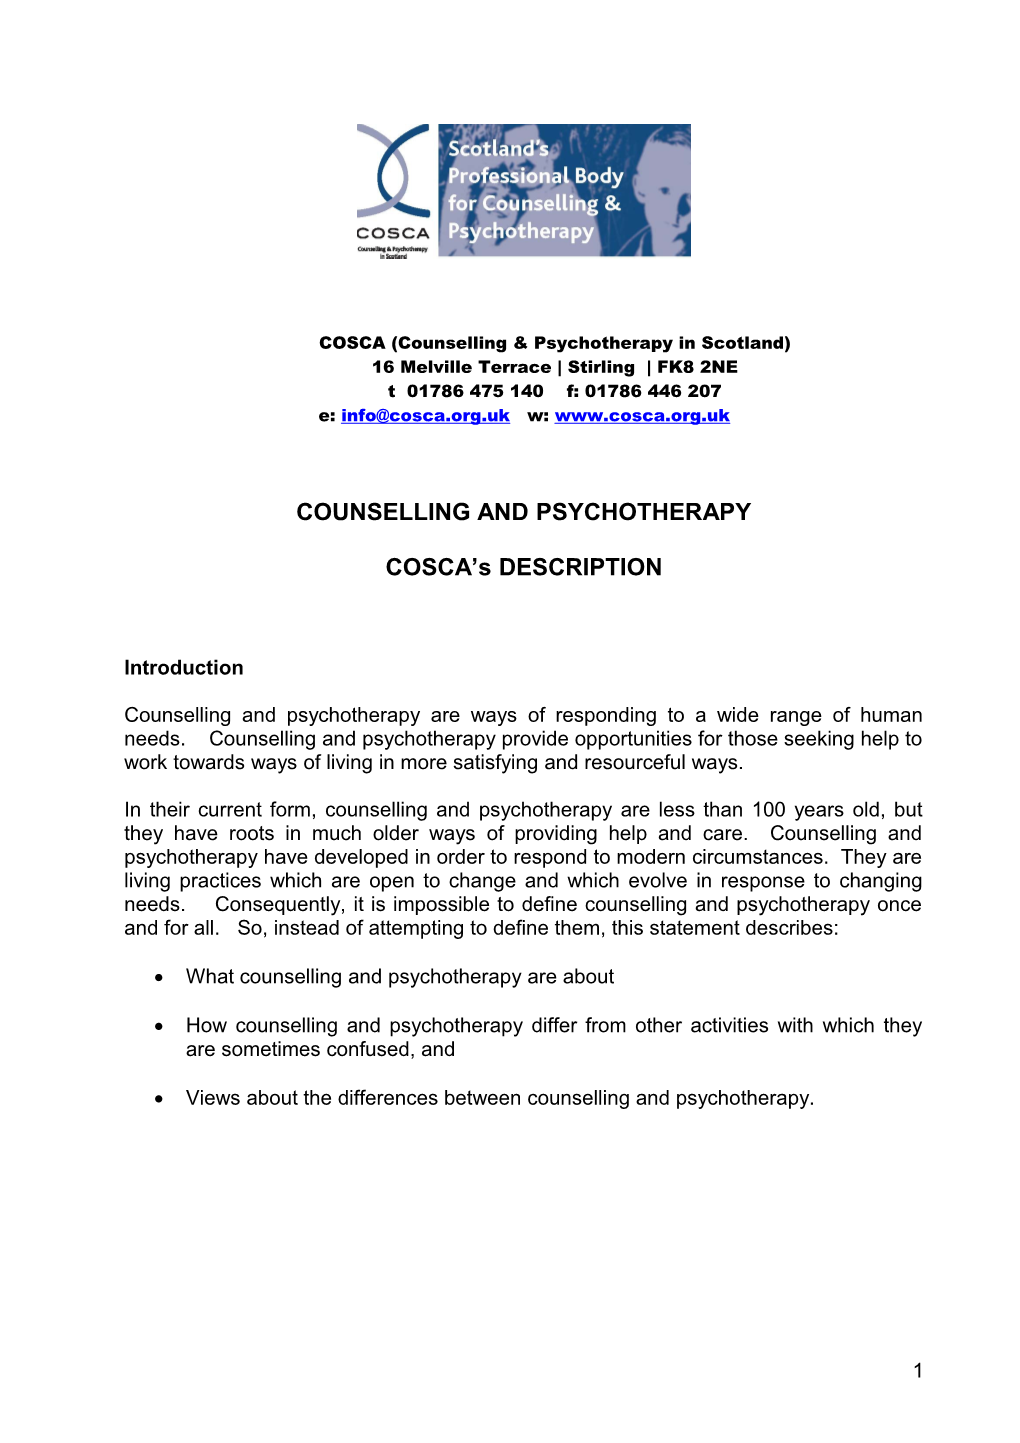 COSCA (Counselling & Psychotherapy in Scotland)